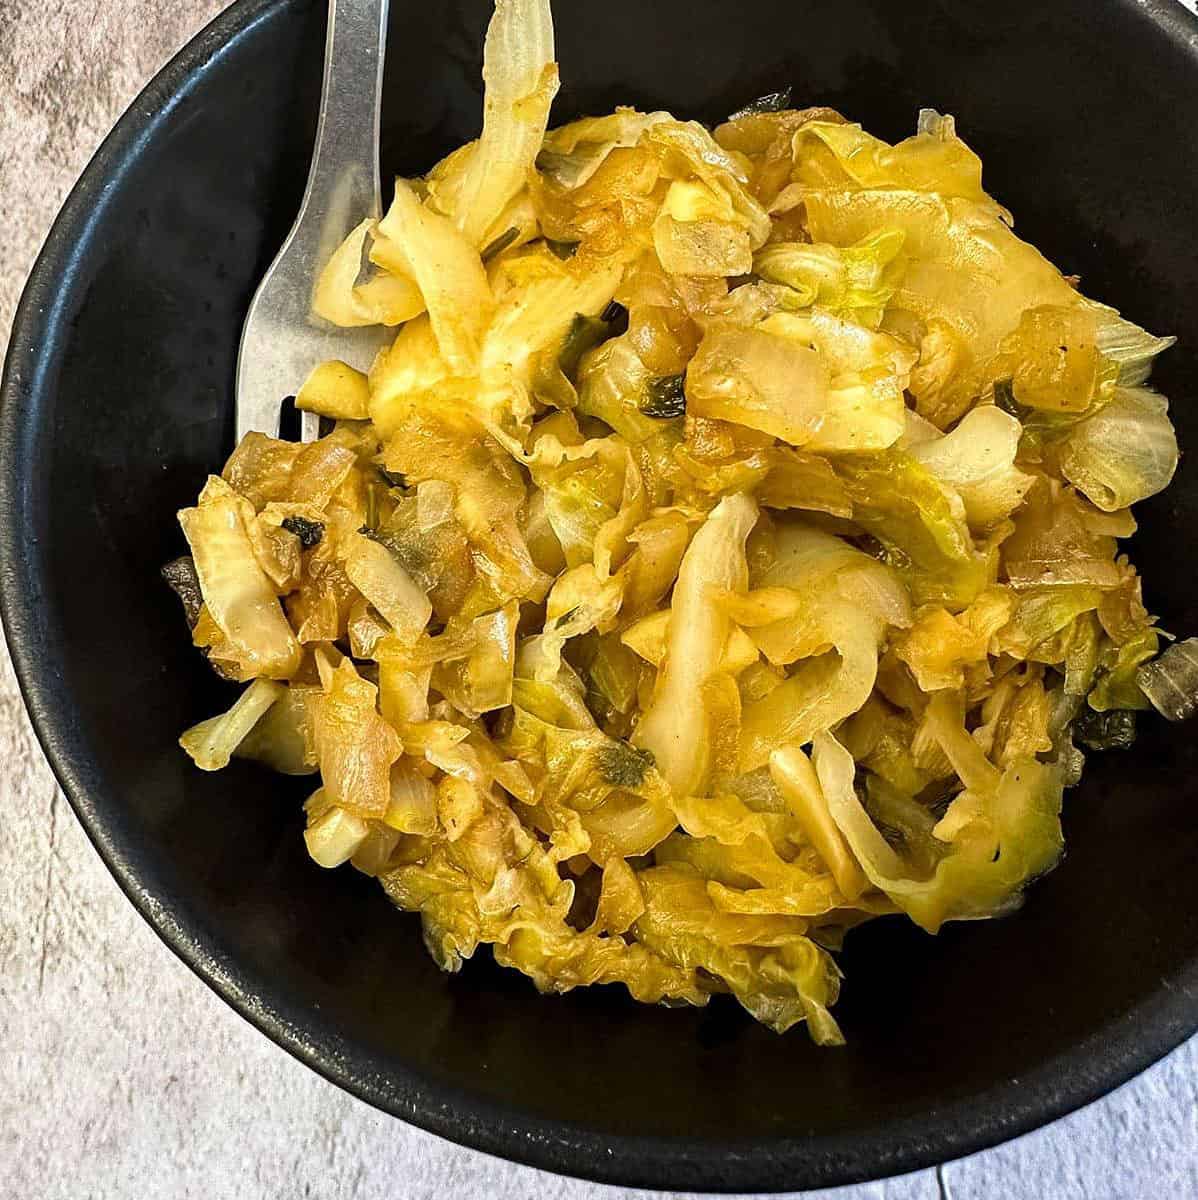  Get ready to indulge in this low-carb vegan fried celery and cabbage dish, perfect for a healthy and filling meal.